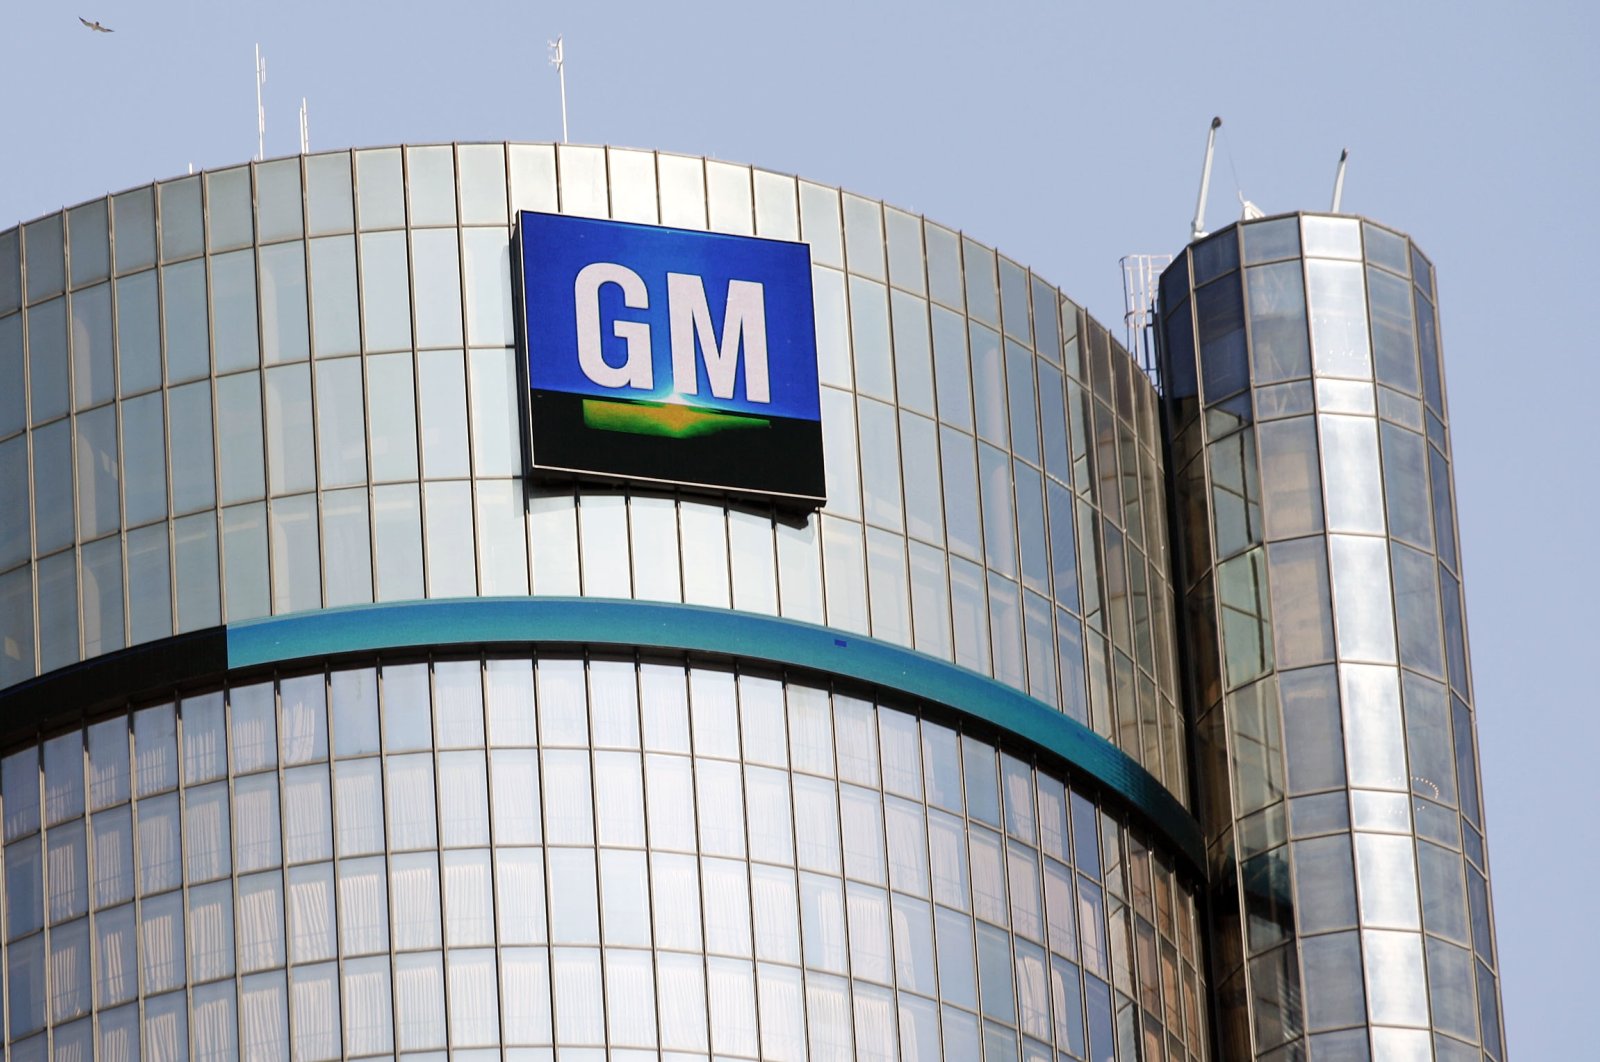 The General Motors logo on the world headquarters building is seen in Detroit, Michigan, U.S., Sept. 17, 2015. (Getty Images / AFP Photo)